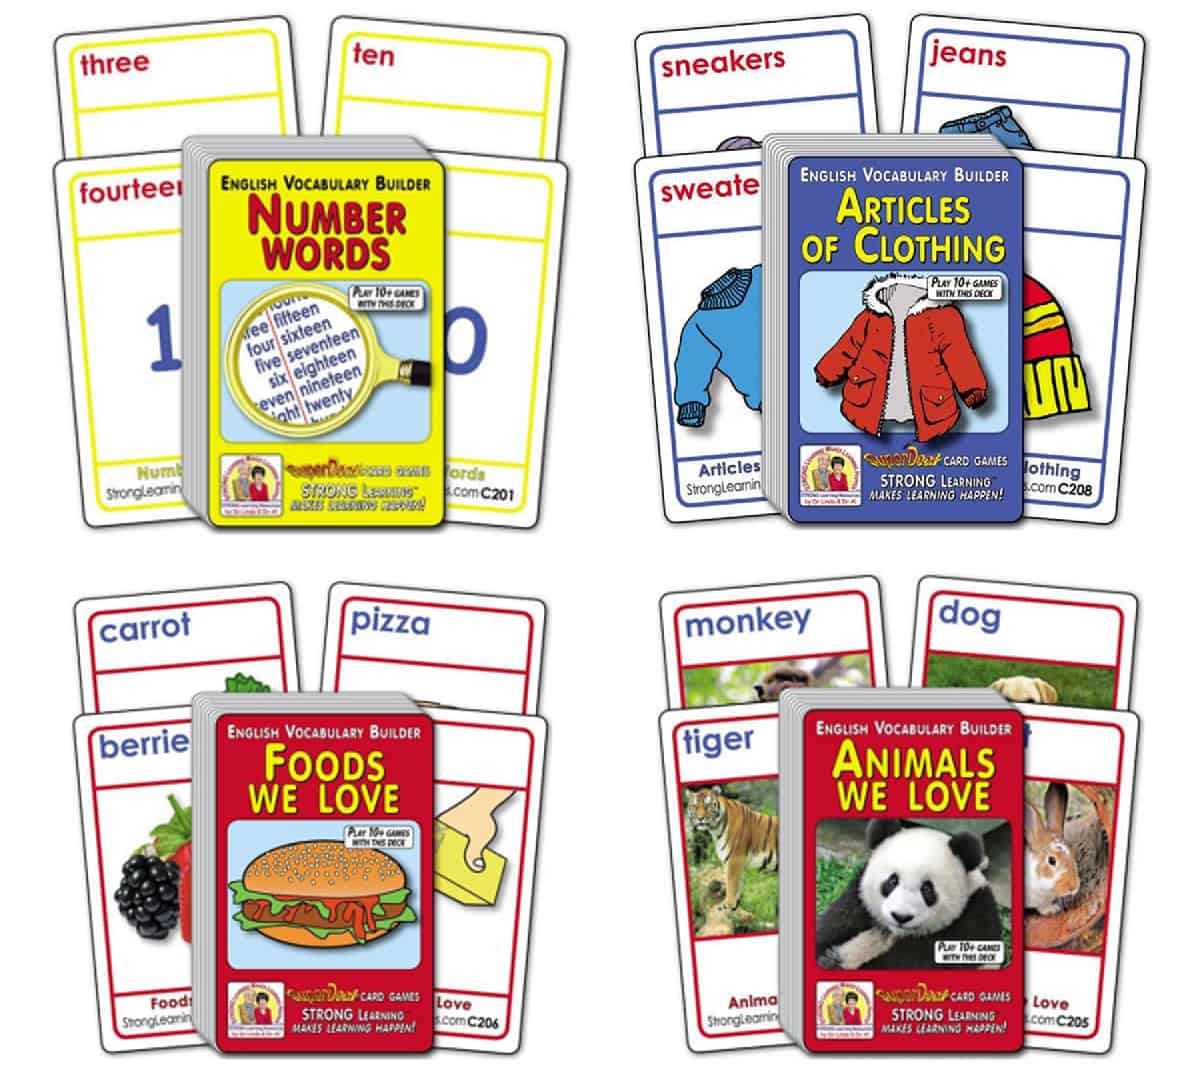 English Vocabulary Builders Super Deck Card is a matching game to learn vocabulary.